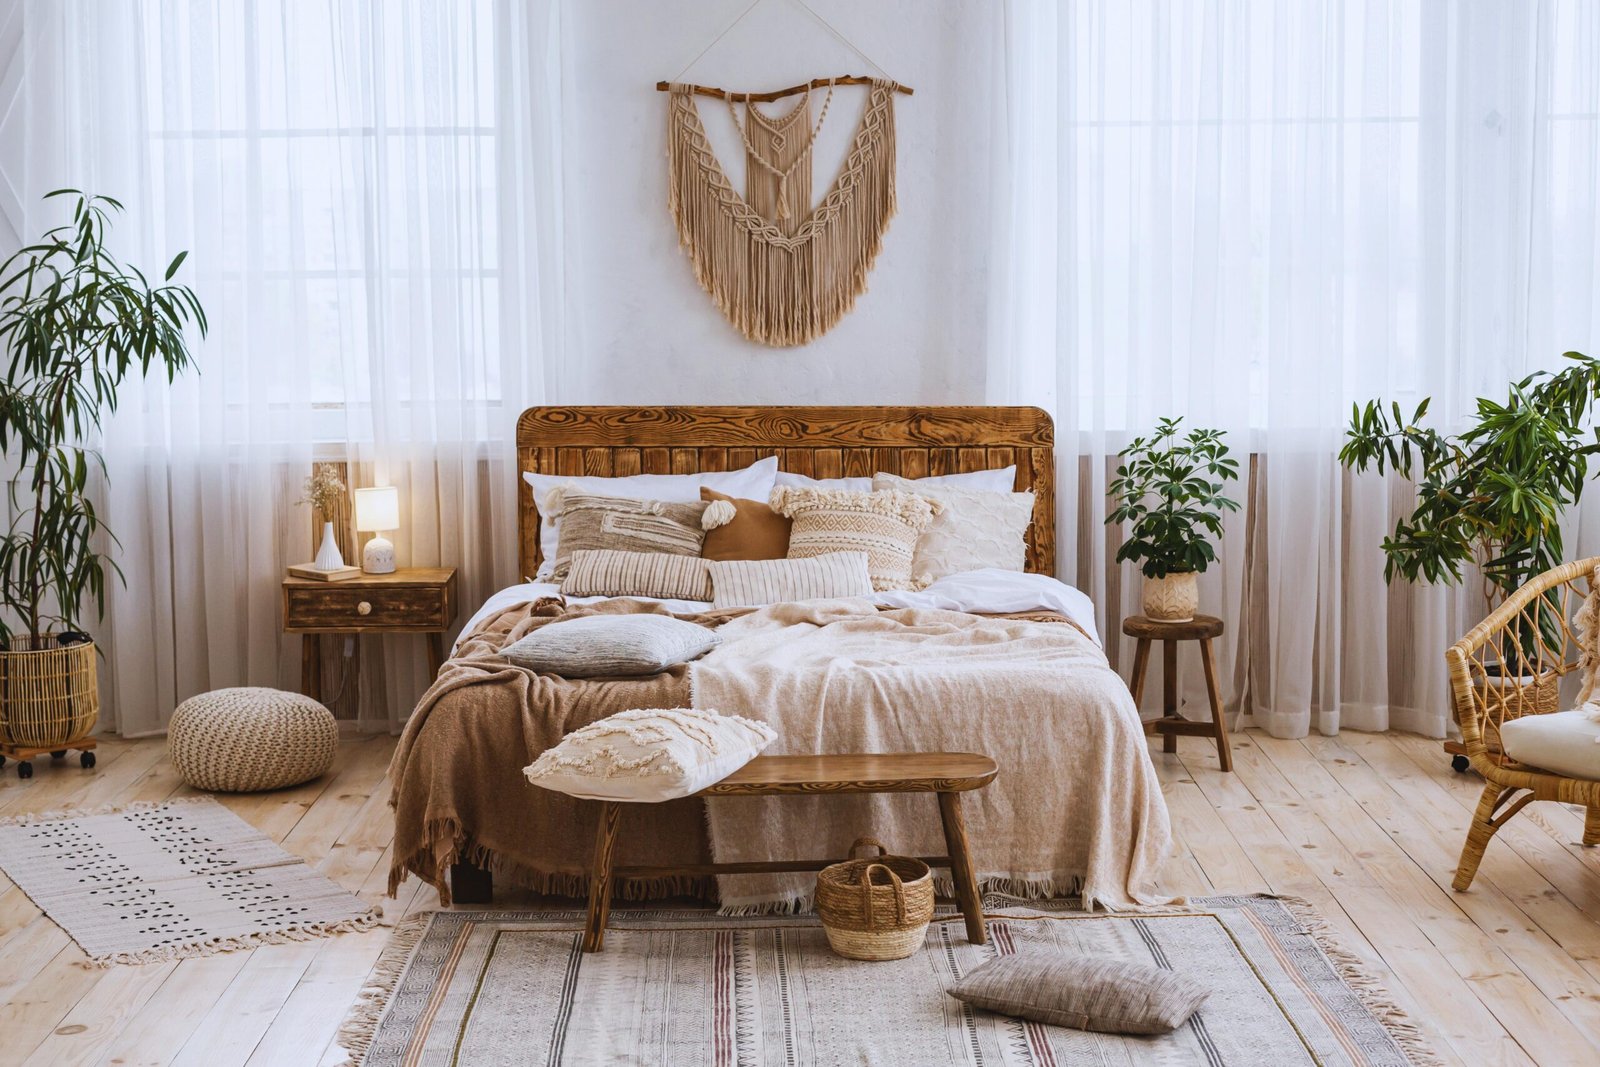 Boho-chic bedroom with macrame wall hangings and rattan furniture.